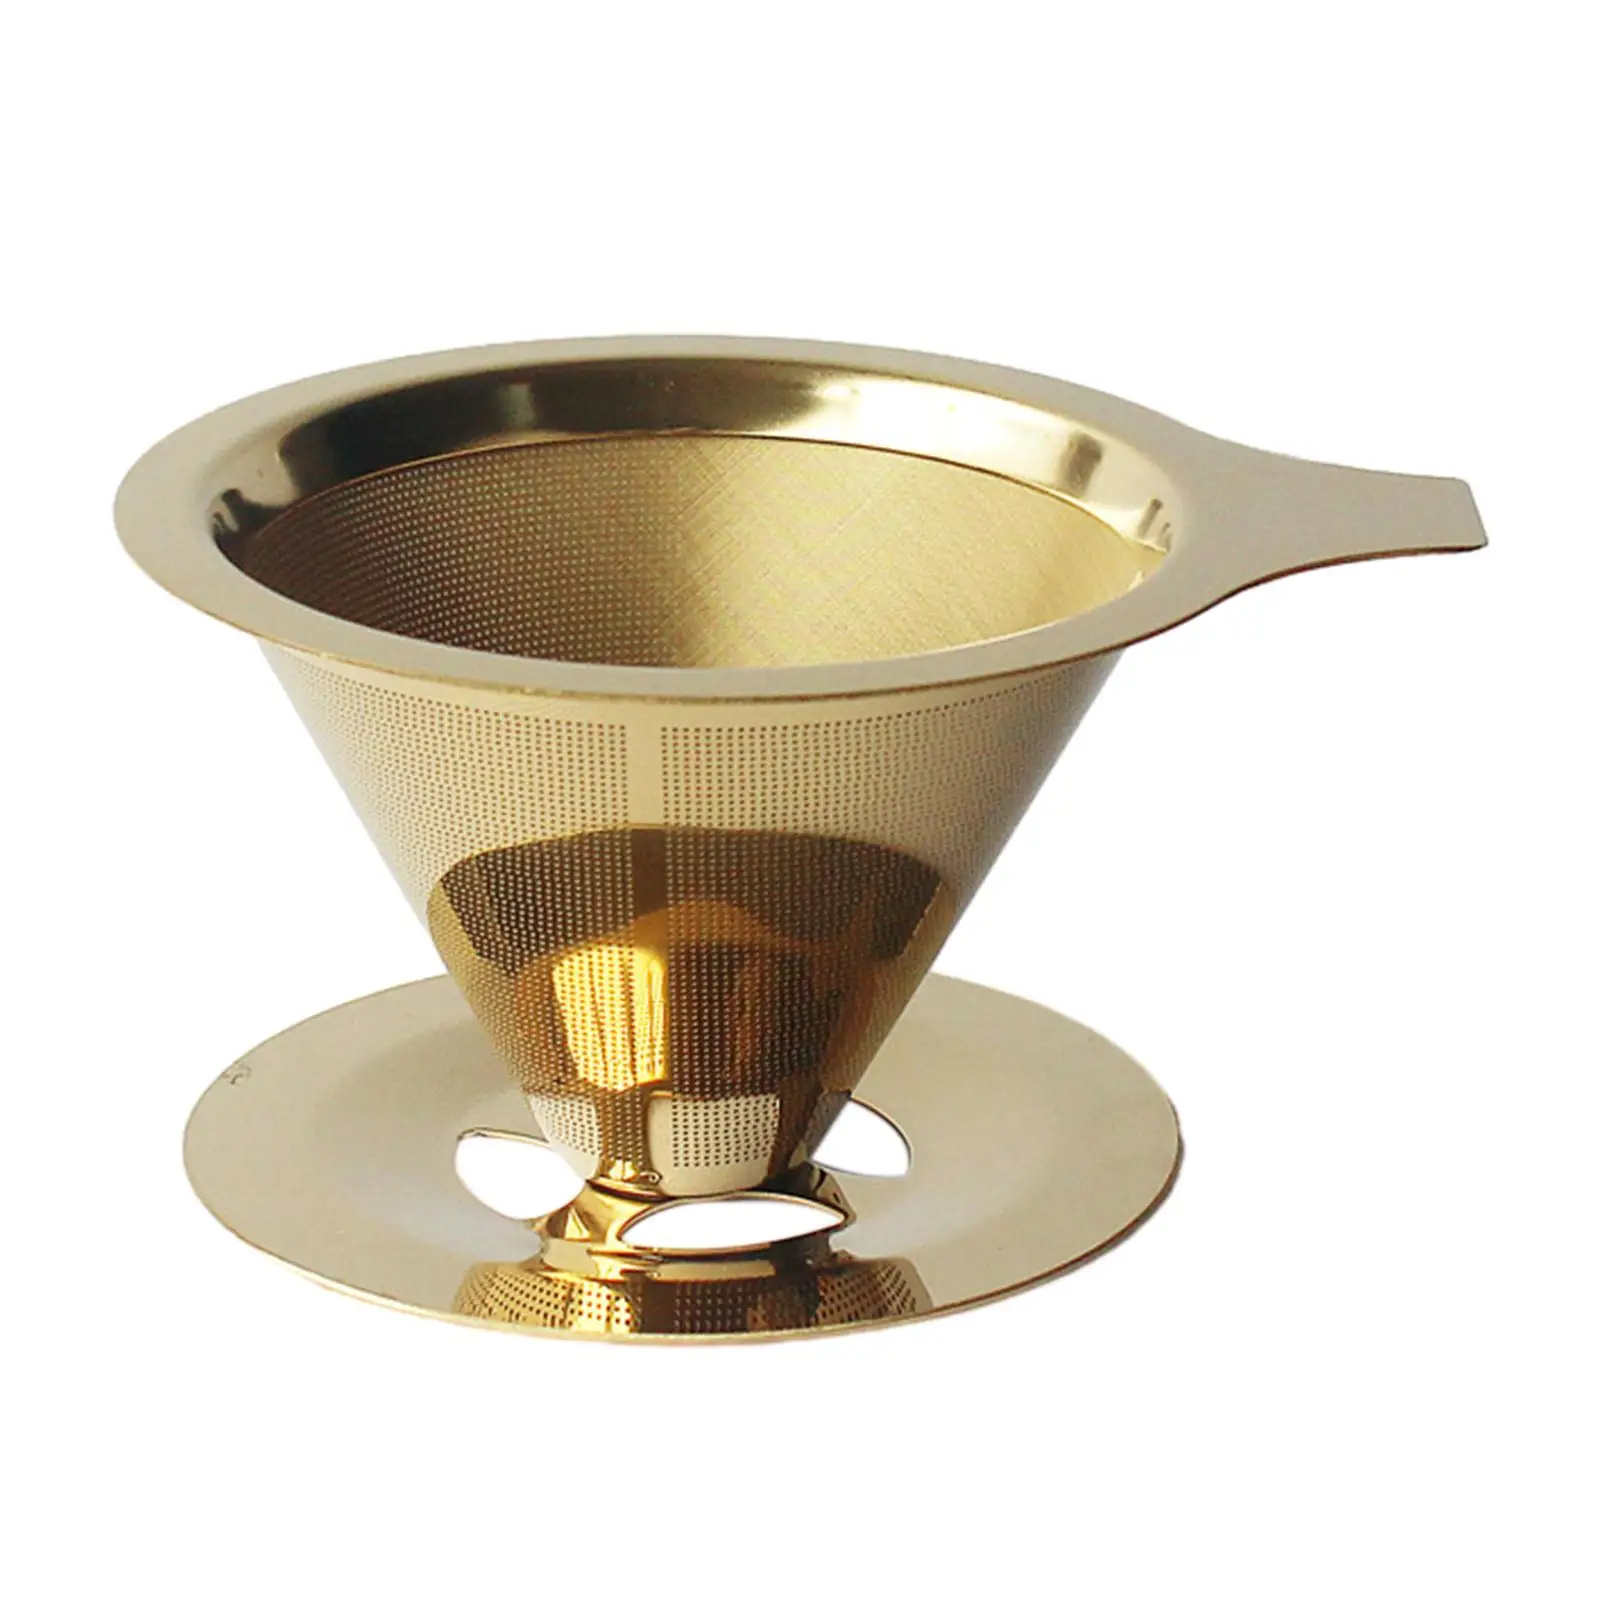 Stainless Steel Coffee Filter Easy to Clean Reusable Single Cup Coffee Maker Mesh Coffee Filter for Home Office